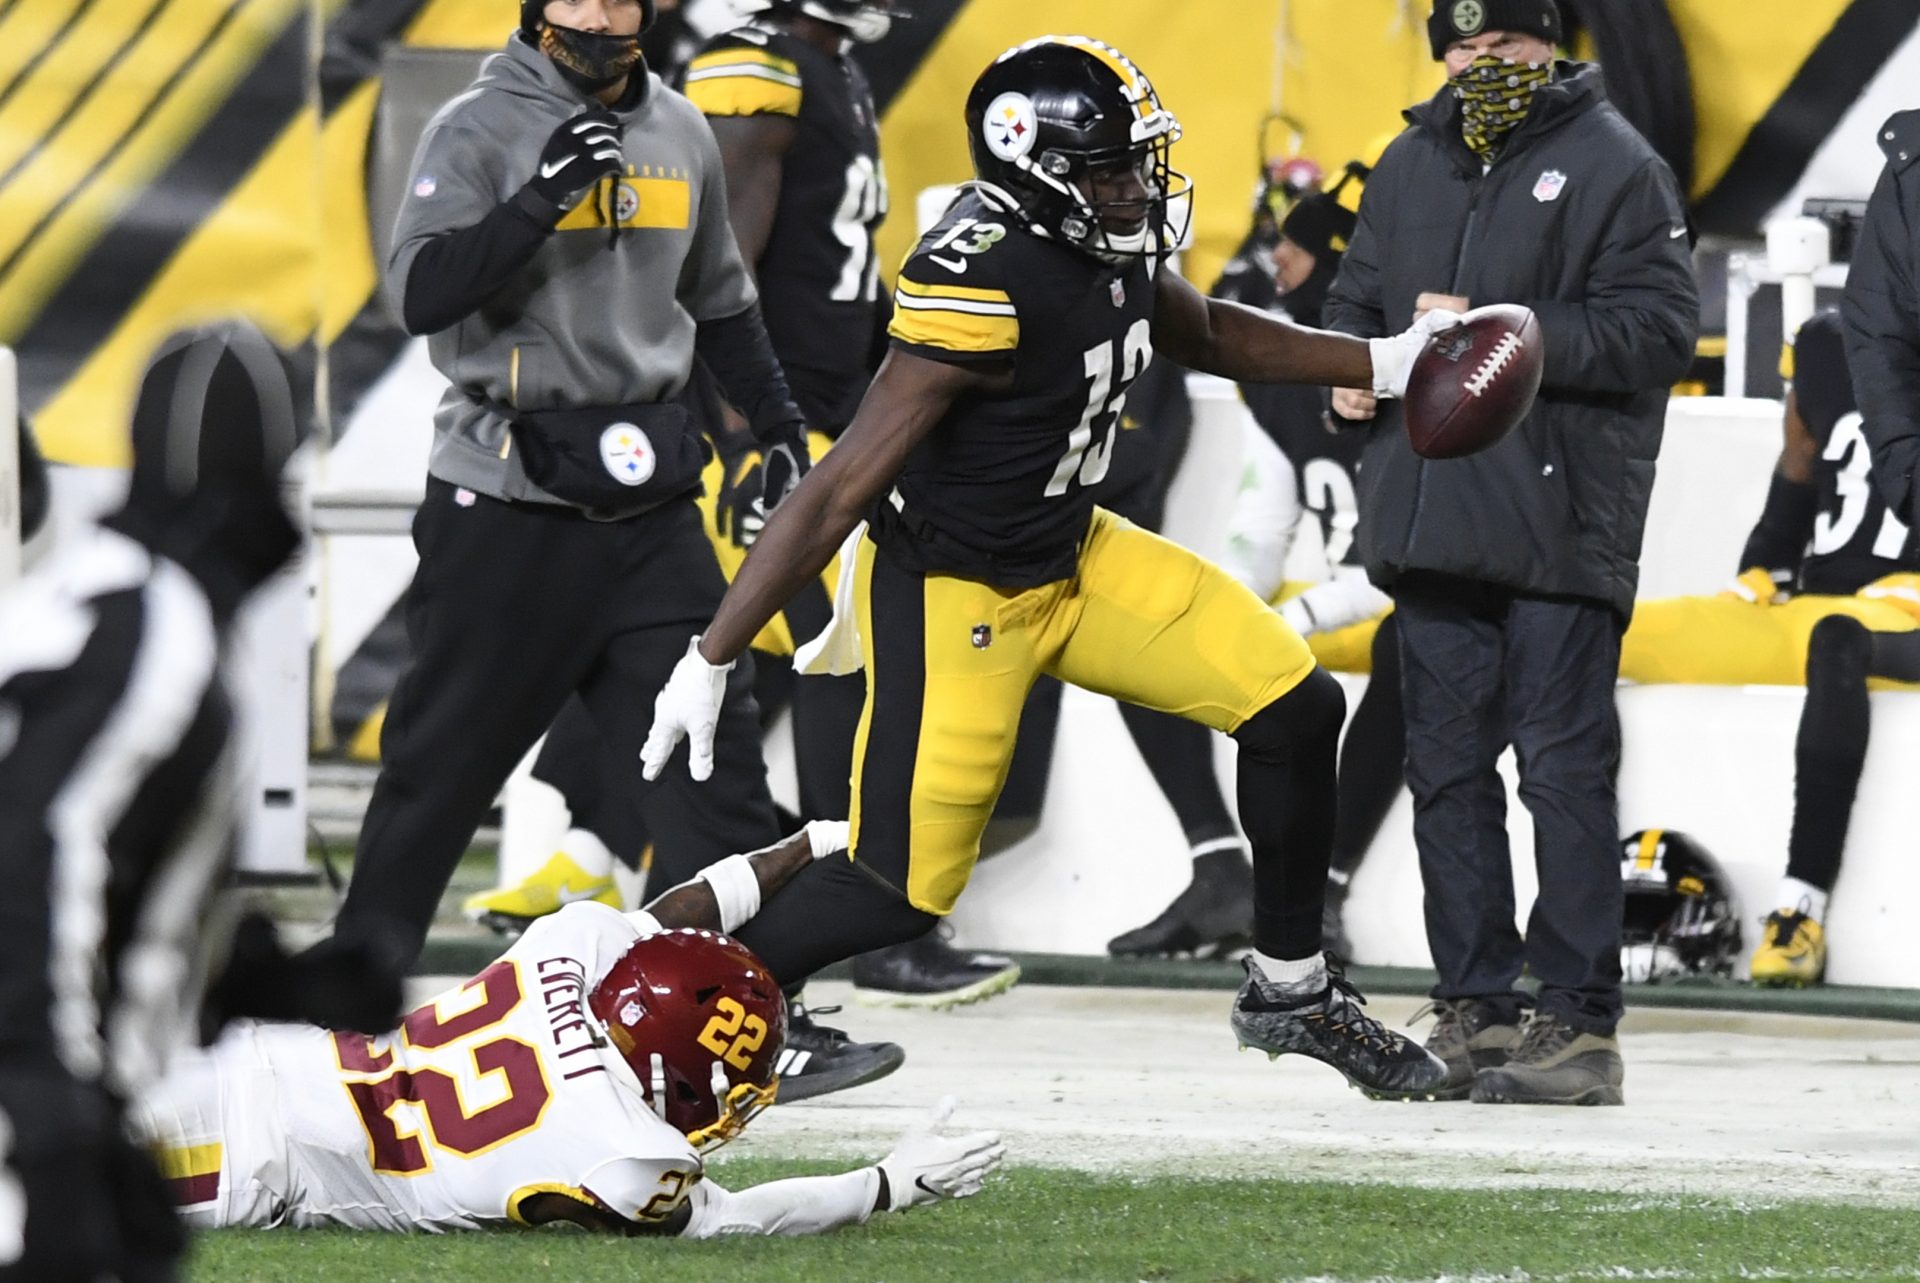 Pittsburgh Steelers wide receiver James Washington (13) gets past Washington Football Team free safety Deshazor Everett (22) after taking a pass from quarterback Ben Roethlisberger for a 50-yard touchdown play during the first half of an NFL football game in Pittsburgh, Monday, Dec. 7, 2020.